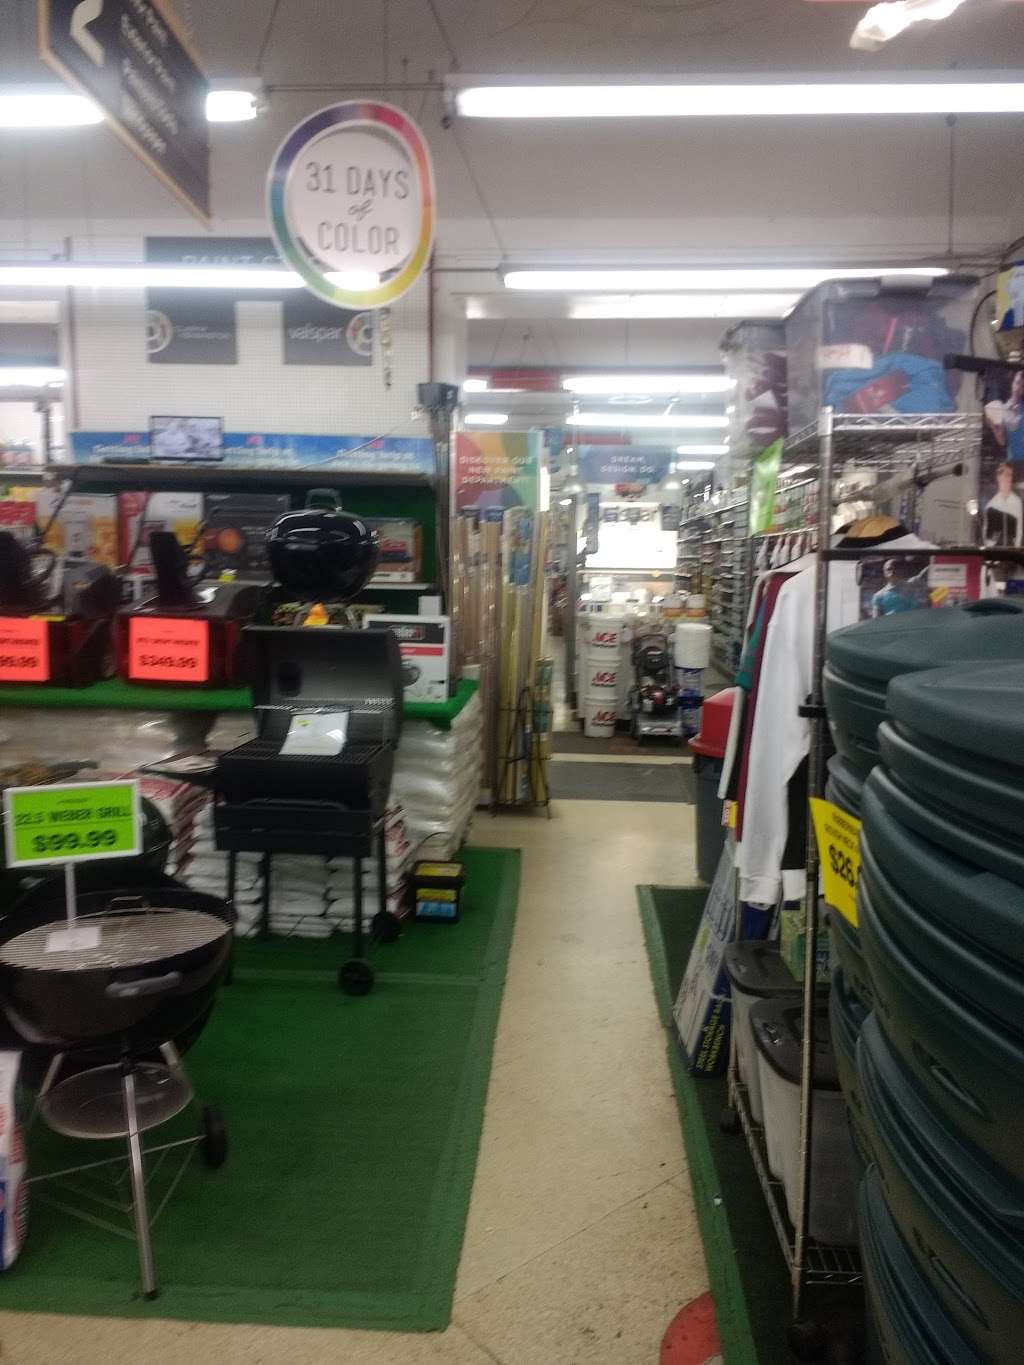 Hymans Hardware | 8614 S Commercial Ave, Chicago, IL 60617, USA | Phone: (773) 721-4644